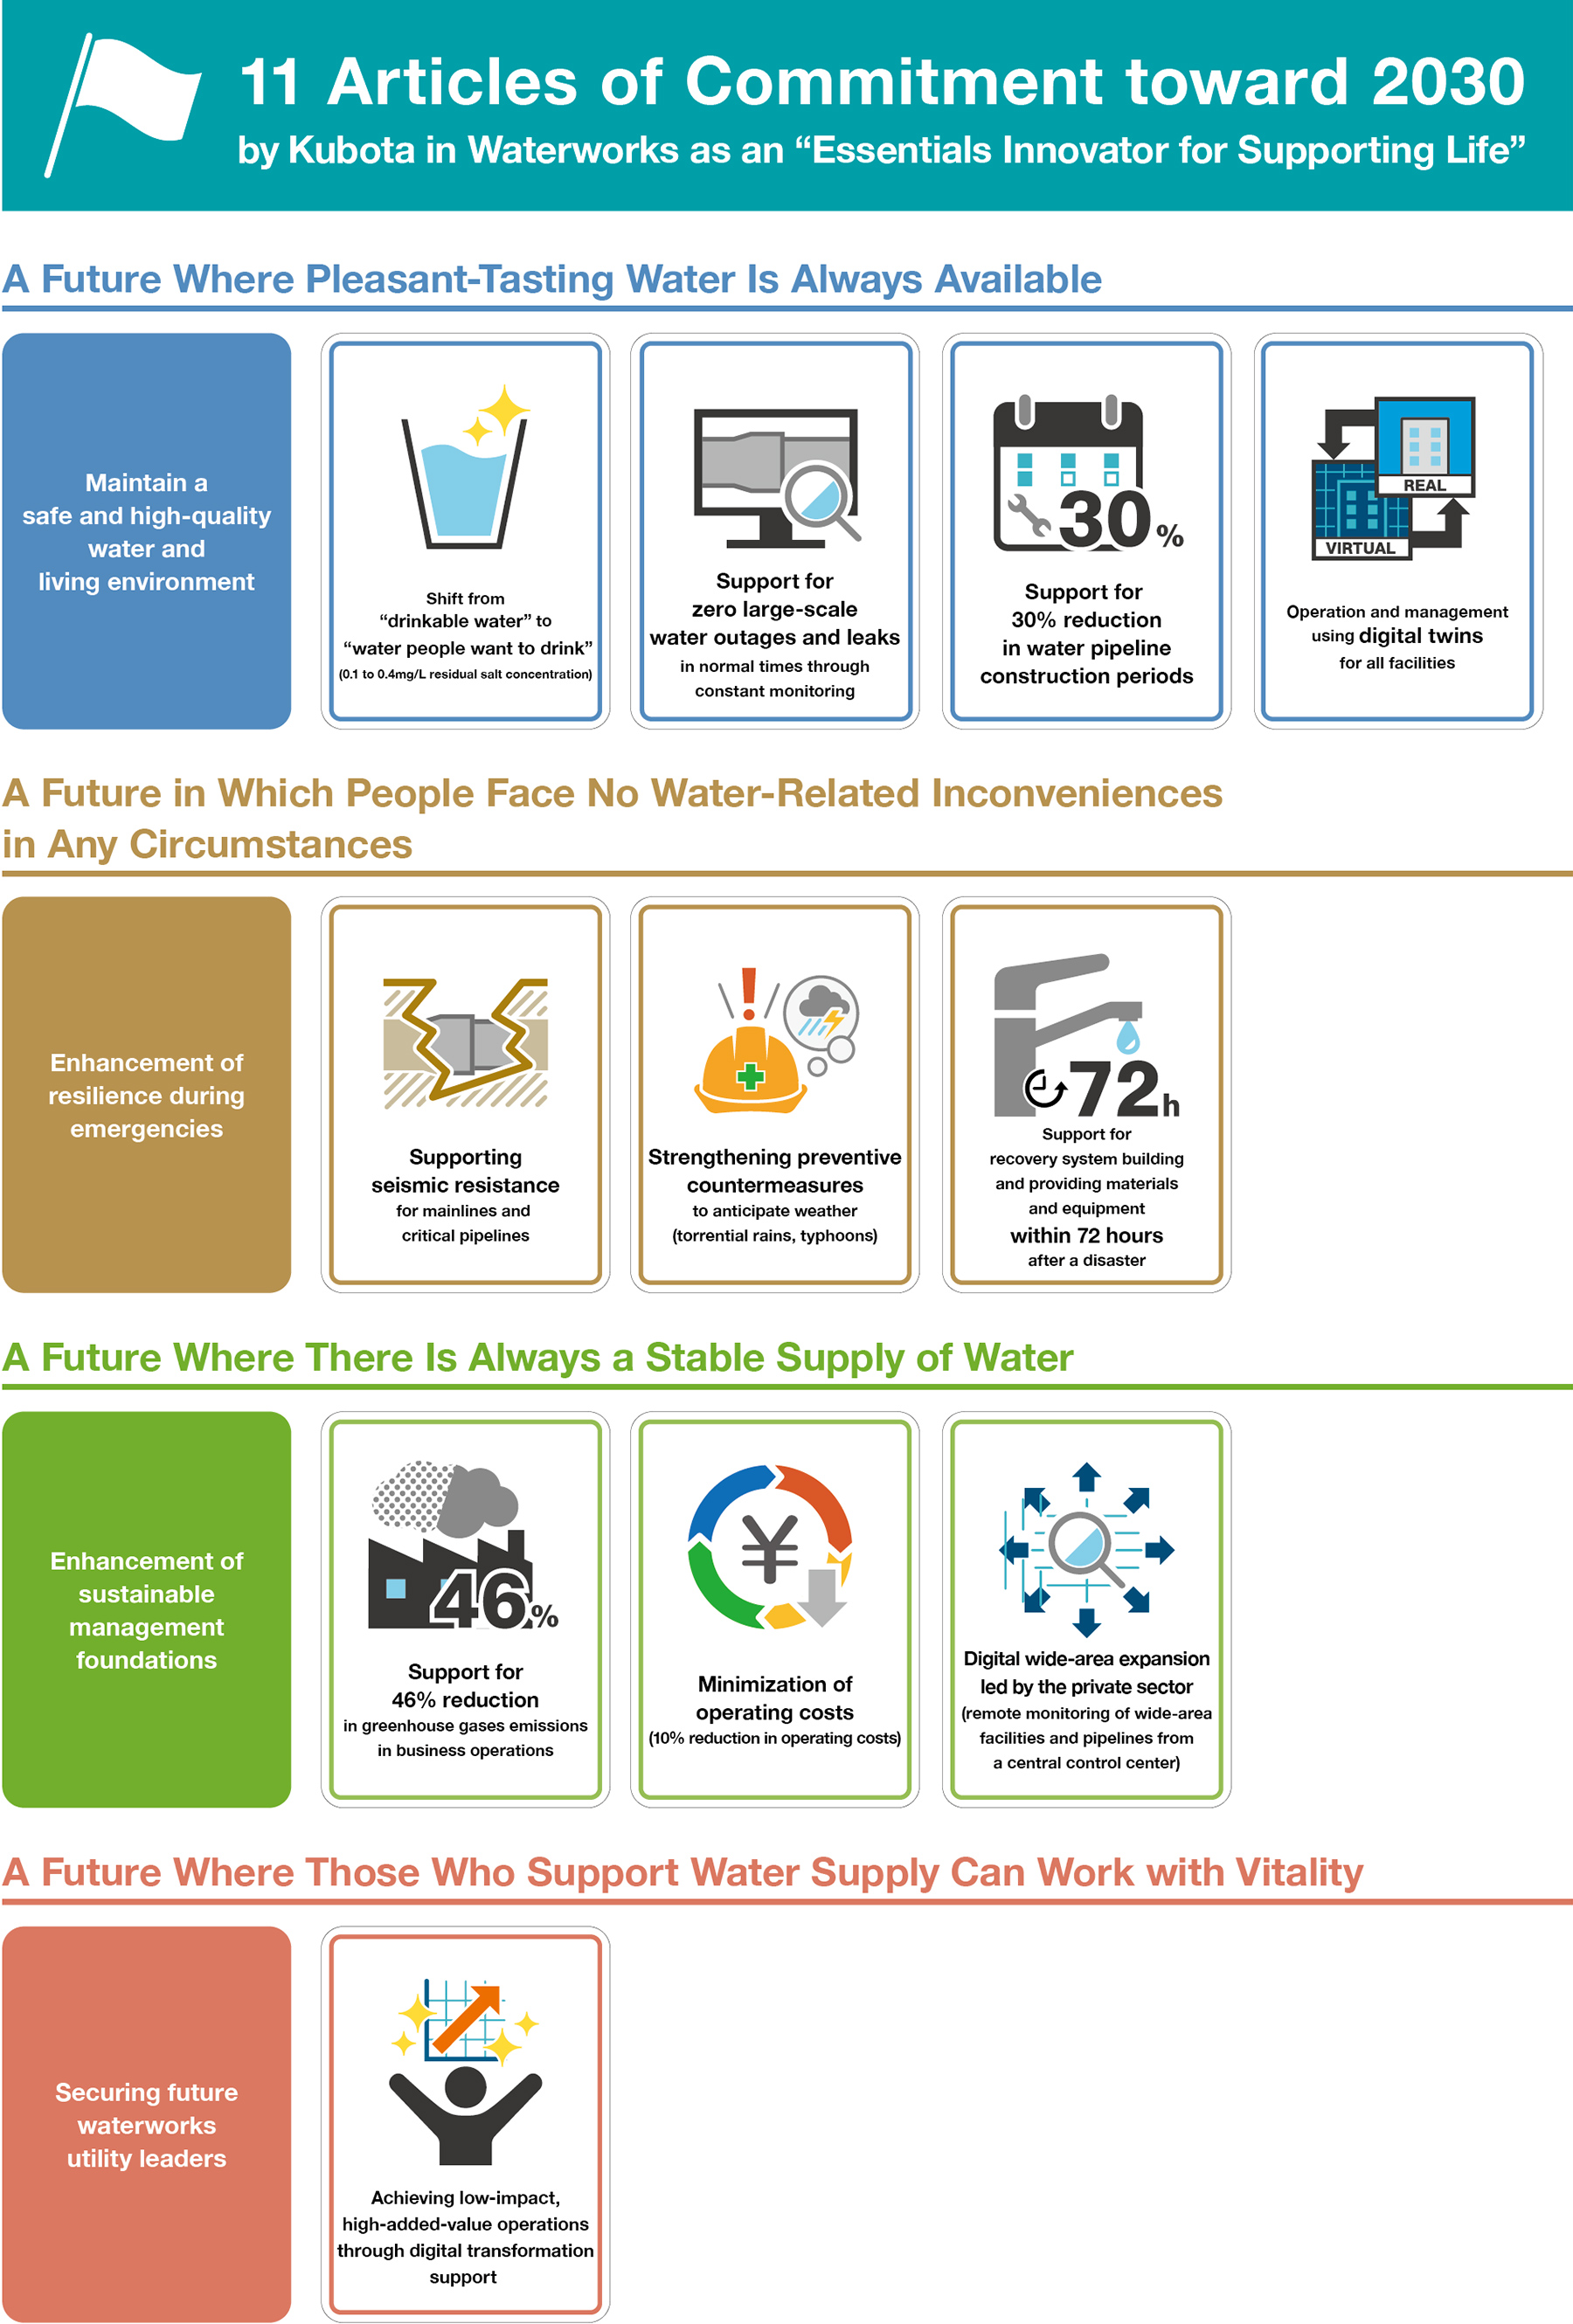 11 Articles of Commitment toward 2030 by Kubota in Waterworks as an “Essentials Innovator for Supporting Life”